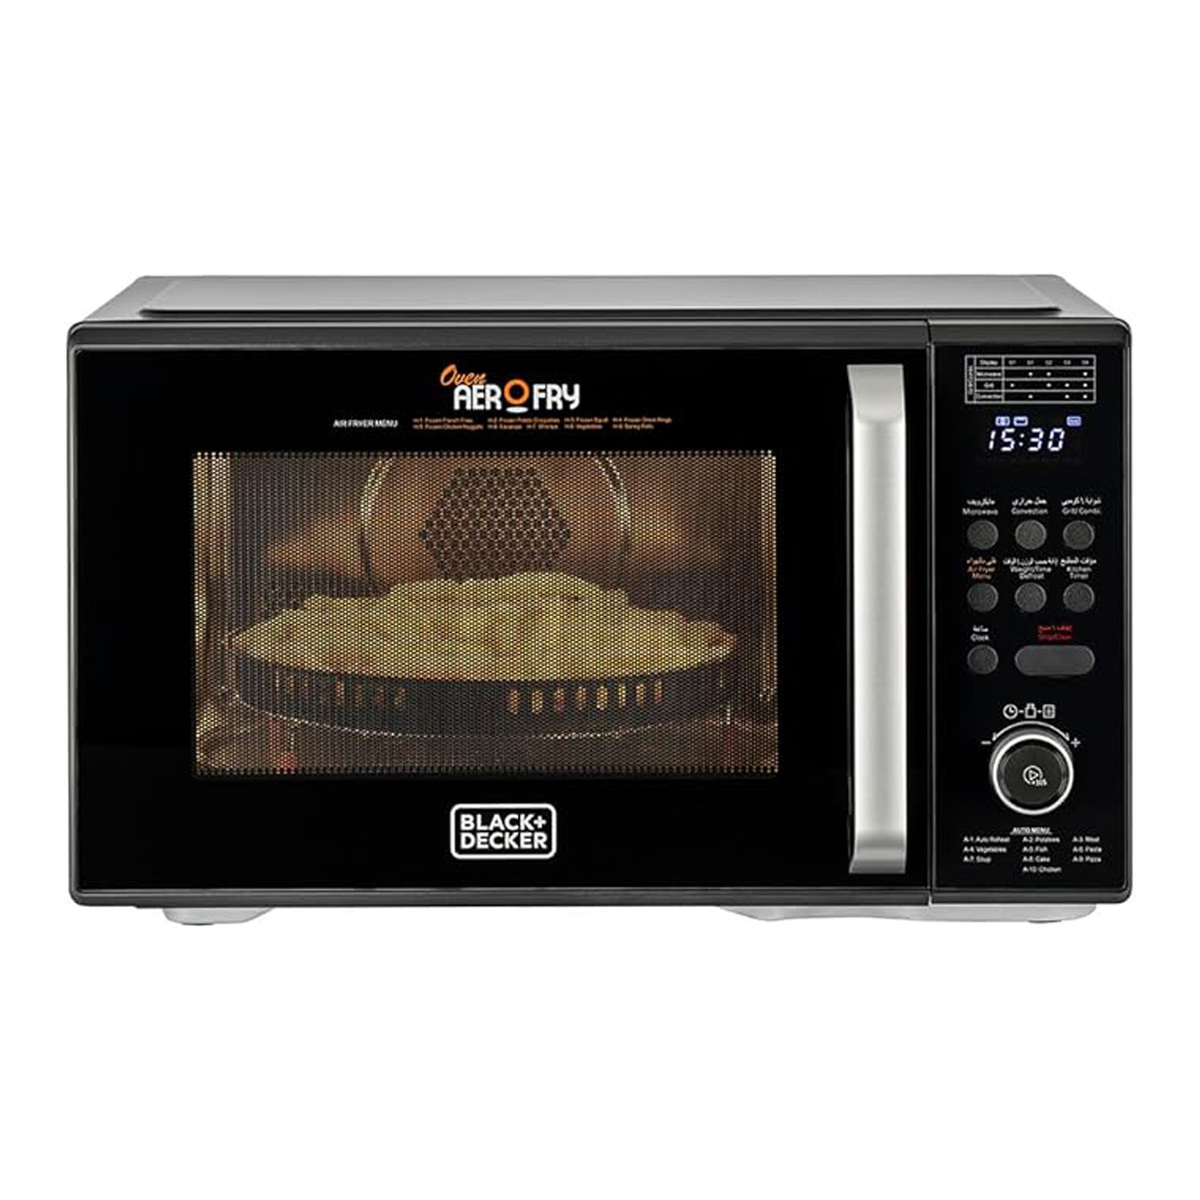 BLACK+DECKER 4-in-1 Digital Microwave Oven with Air Fryer, Grill & Convection, 29 L, MZAF2910